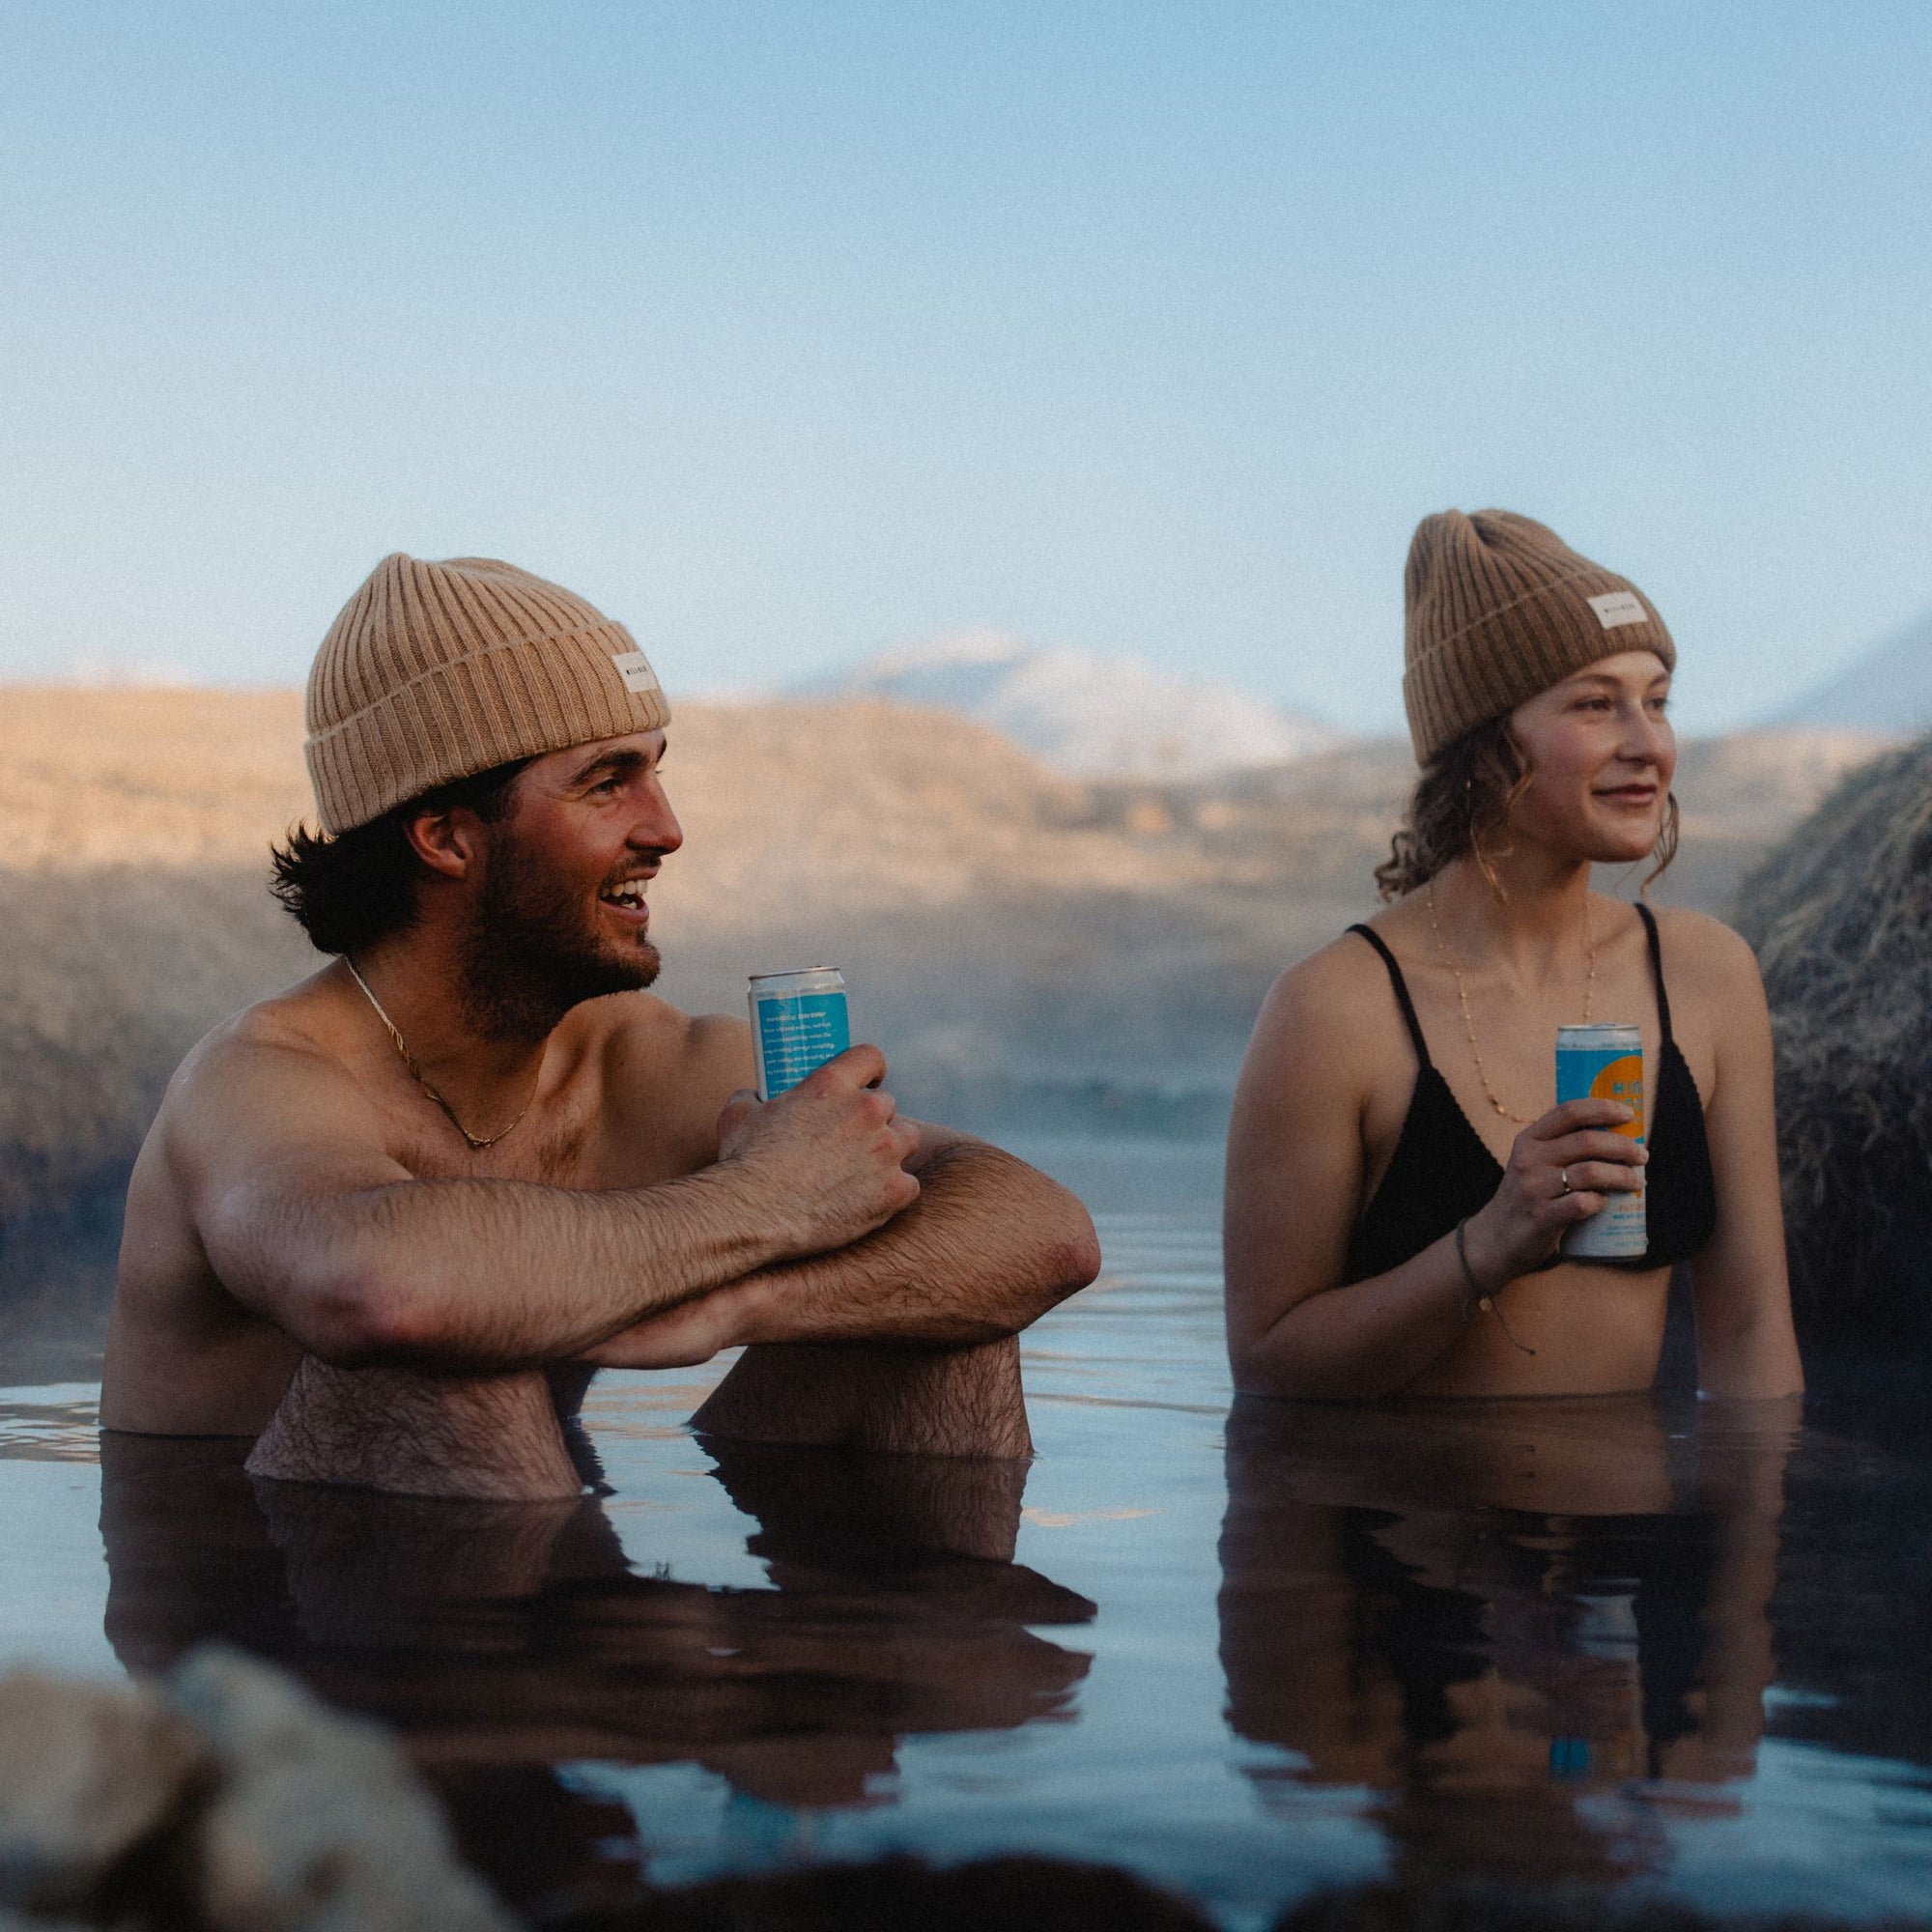 Man and woman wearing beanies and sitting in hot spring